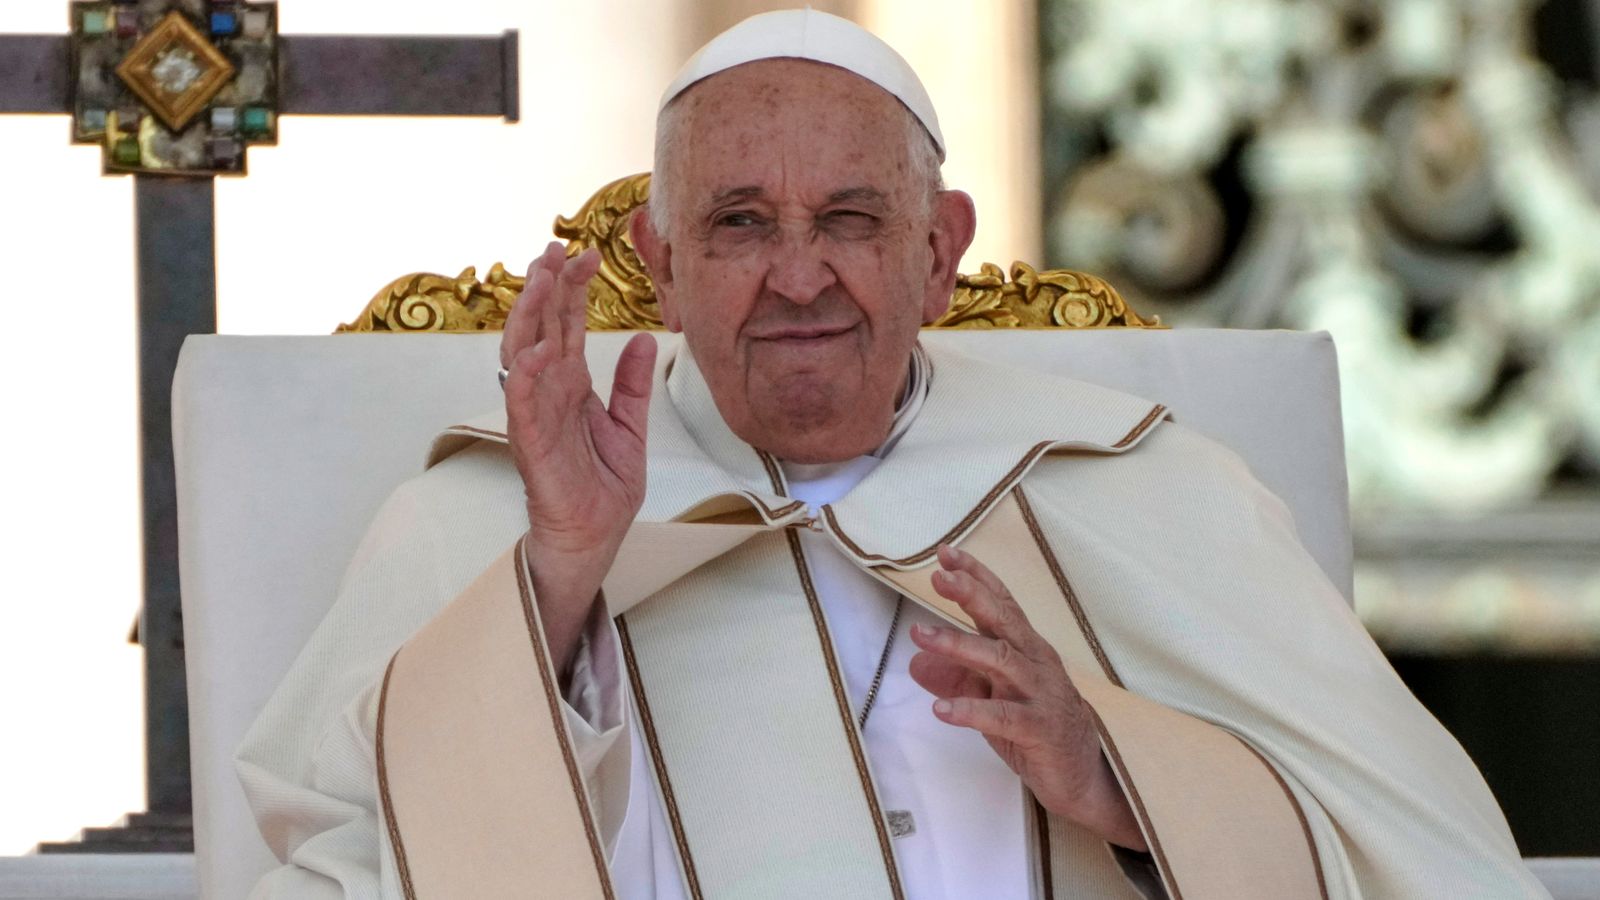 Pope Francis used derogatory term for gay men, reports claim